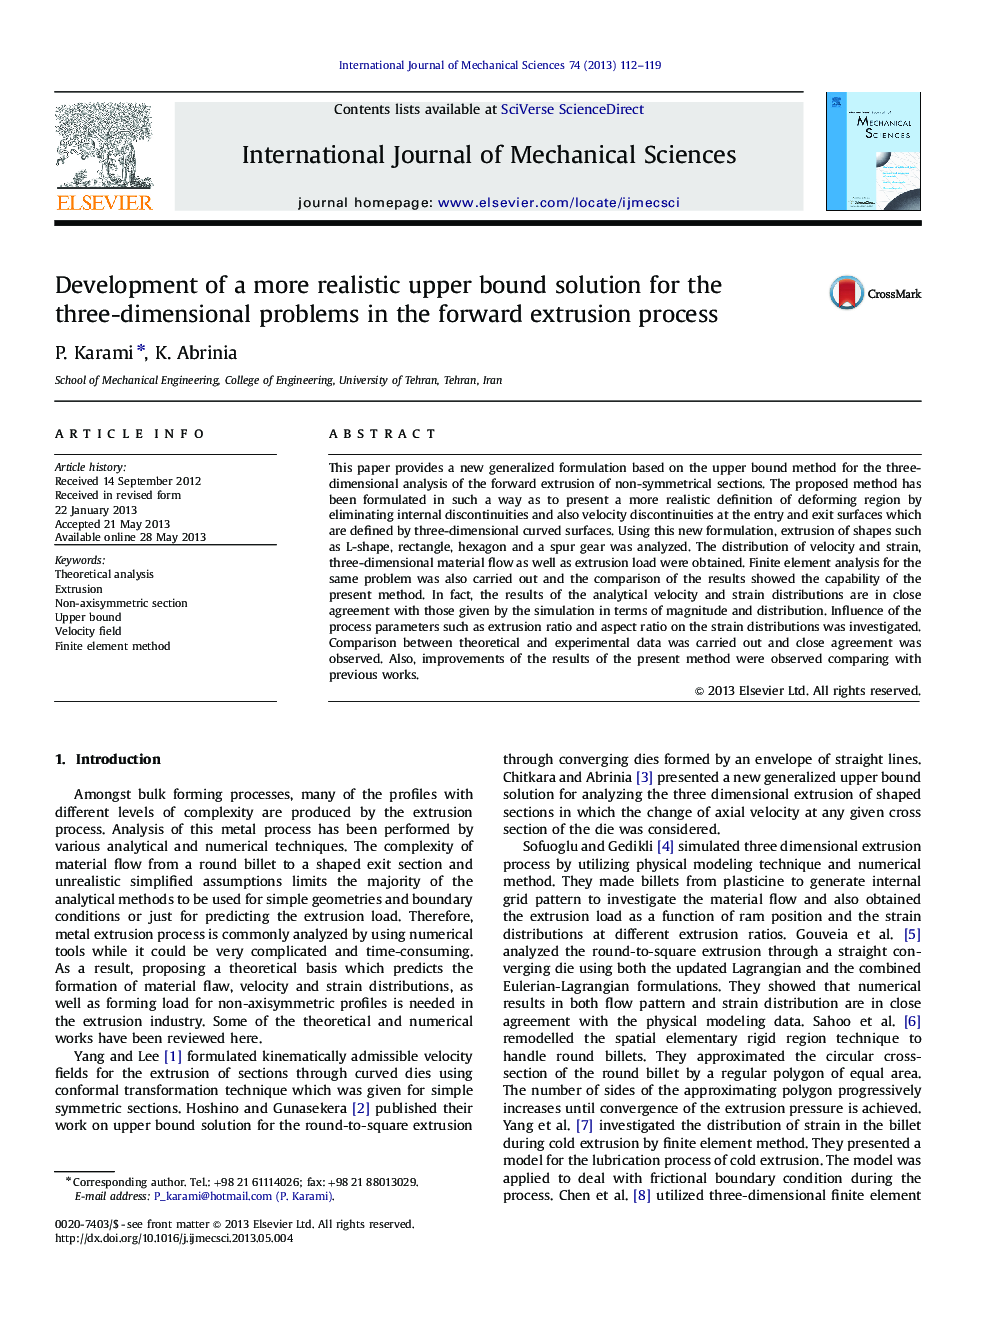 Development of a more realistic upper bound solution for the three-dimensional problems in the forward extrusion process